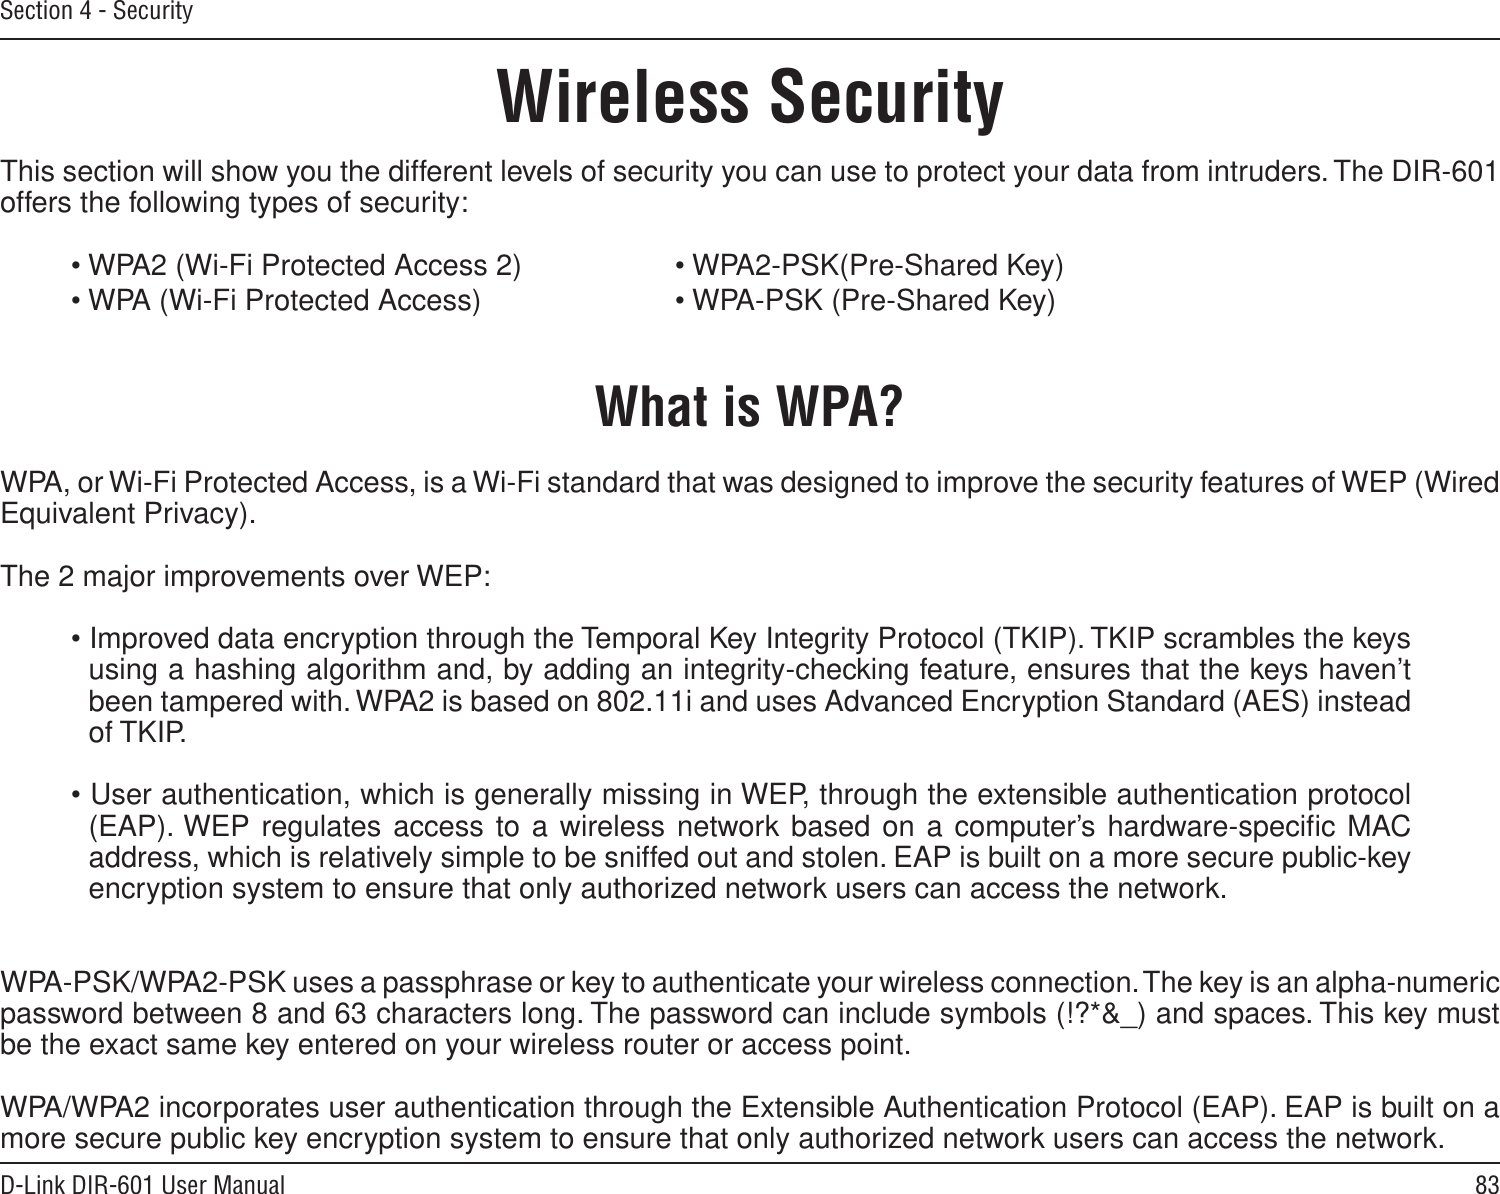 83D-Link DIR-601 User ManualSection 4 - SecurityWireless SecurityThis section will show you the different levels of security you can use to protect your data from intruders. The DIR-601 offers the following types of security:• WPA2 (Wi-Fi Protected Access 2)     • WPA2-PSK(Pre-Shared Key)• WPA (Wi-Fi Protected Access)      • WPA-PSK (Pre-Shared Key)What is WPA?WPA, or Wi-Fi Protected Access, is a Wi-Fi standard that was designed to improve the security features of WEP (Wired Equivalent Privacy).  The 2 major improvements over WEP: • Improved data encryption through the Temporal Key Integrity Protocol (TKIP). TKIP scrambles the keys using a hashing algorithm and, by adding an integrity-checking feature, ensures that the keys haven’t been tampered with. WPA2 is based on 802.11i and uses Advanced Encryption Standard (AES) instead of TKIP.• User authentication, which is generally missing in WEP, through the extensible authentication protocol (EAP). WEP regulates access to a wireless network based on a computer’s hardware-speciﬁc MAC address, which is relatively simple to be sniffed out and stolen. EAP is built on a more secure public-key encryption system to ensure that only authorized network users can access the network.WPA-PSK/WPA2-PSK uses a passphrase or key to authenticate your wireless connection. The key is an alpha-numeric password between 8 and 63 characters long. The password can include symbols (!?*&amp;_) and spaces. This key must be the exact same key entered on your wireless router or access point.WPA/WPA2 incorporates user authentication through the Extensible Authentication Protocol (EAP). EAP is built on a more secure public key encryption system to ensure that only authorized network users can access the network.